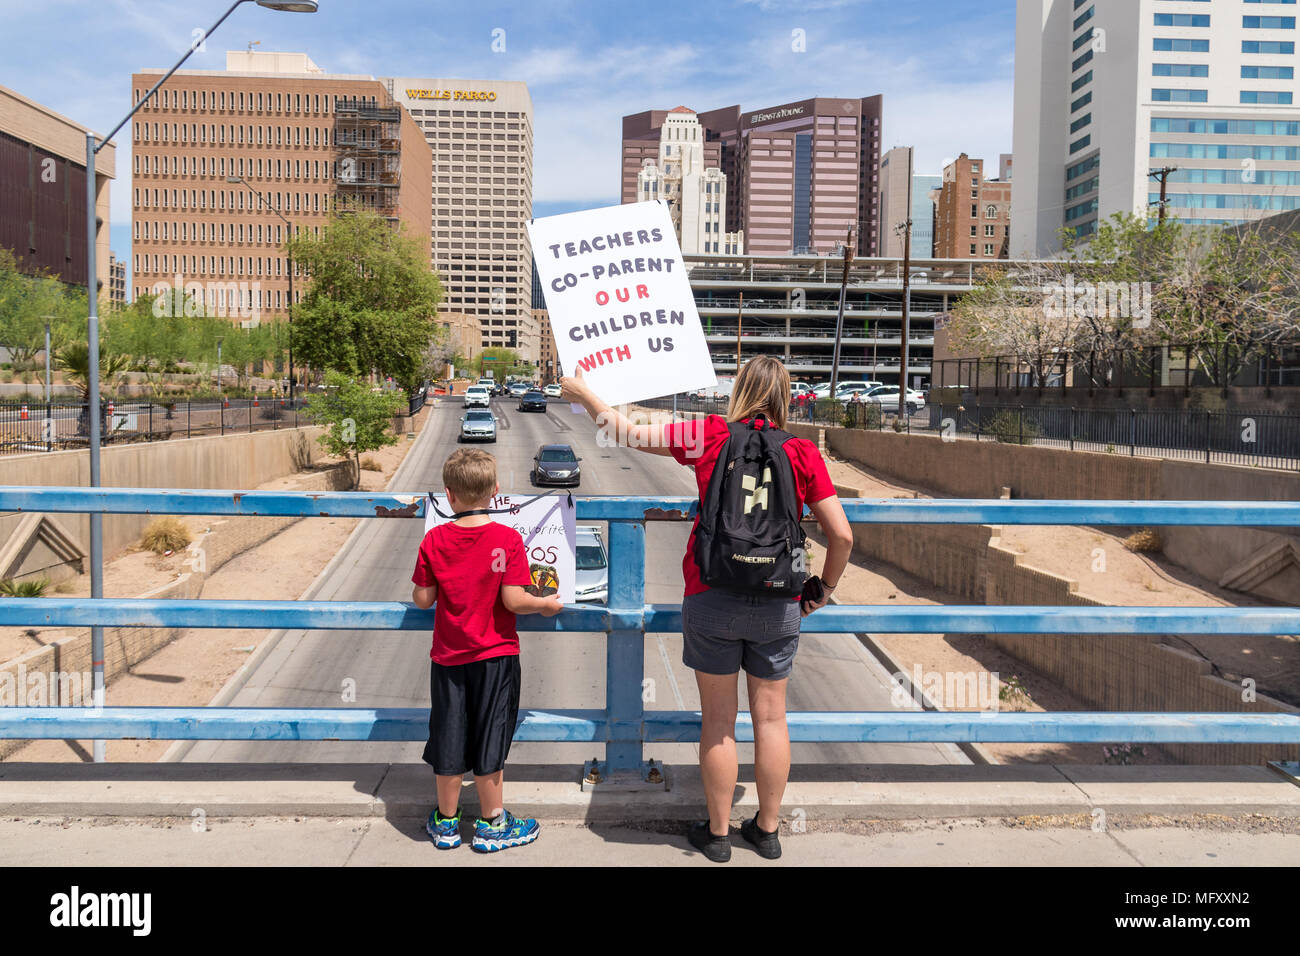 Phoenix, USA, 26th April, 2018, The #RedForEd March - Teacher's Co-Parent Our Children With Us.  Credit:  Michelle Jones - Arizona/Alamy Live News. Stock Photo